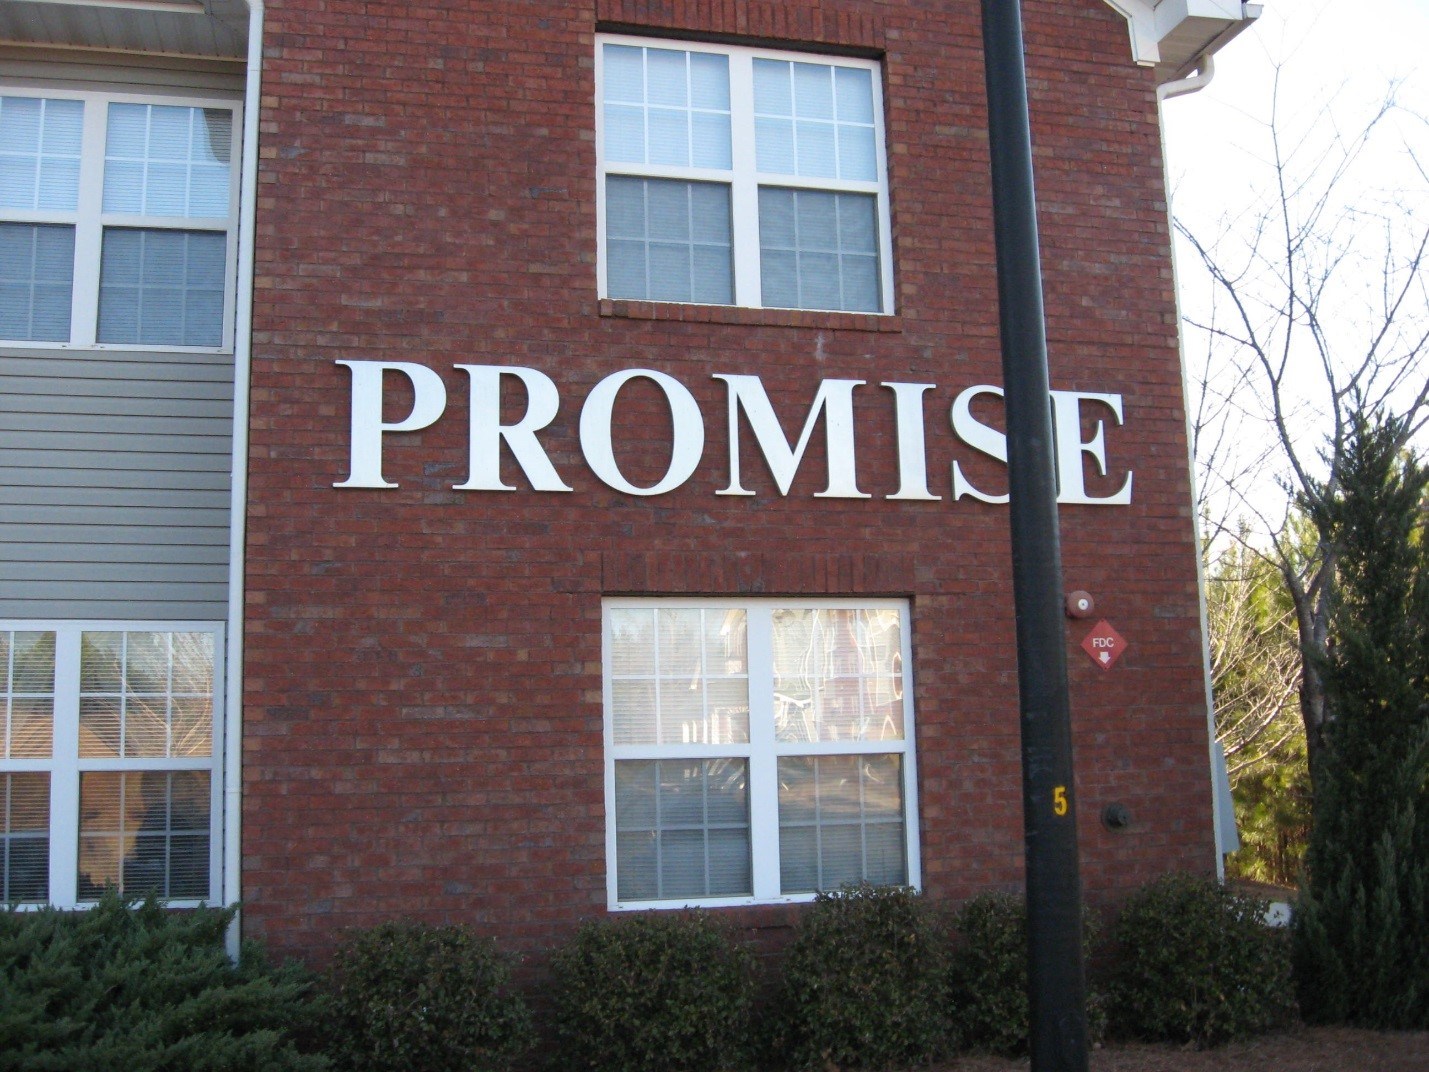 THE PROMISE PROJECT